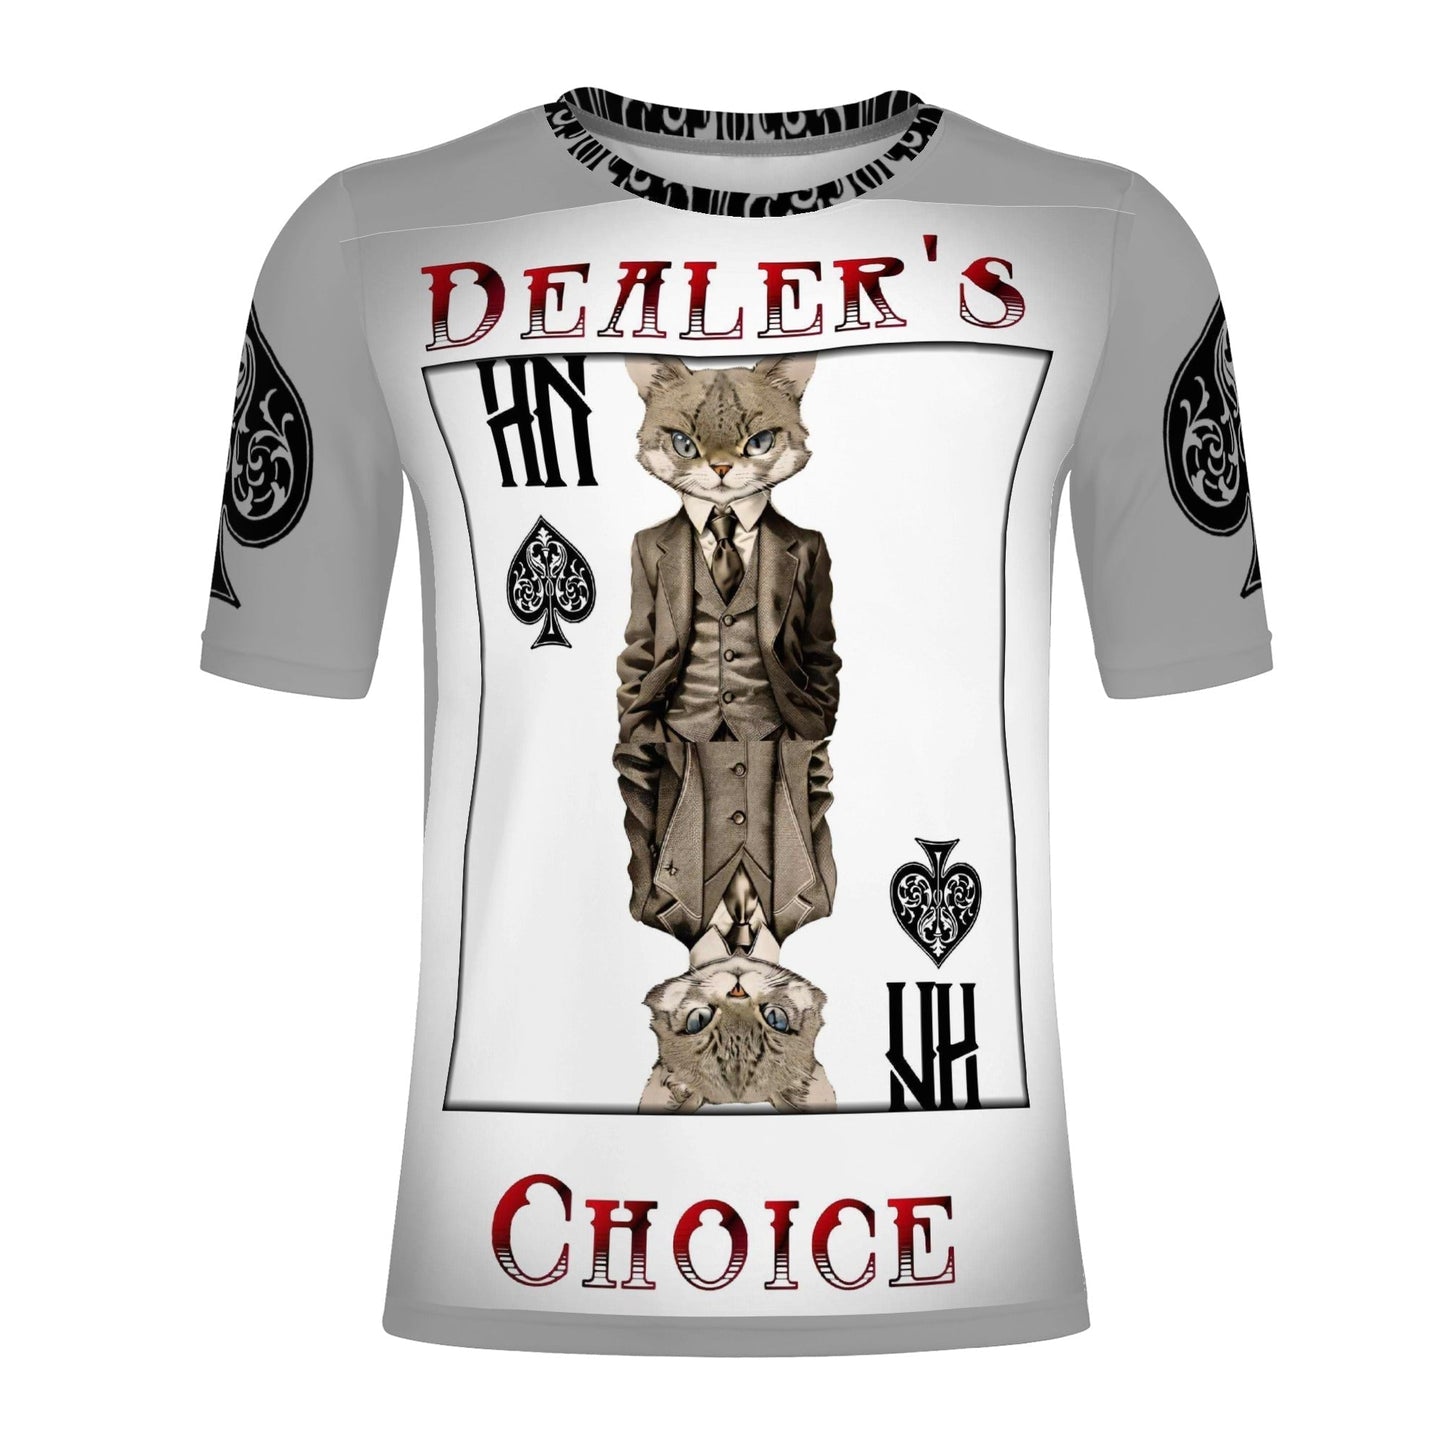 Stand out  with the  Dealers Choice Mens T-shirts  available at Hey Nugget. Grab yours today!